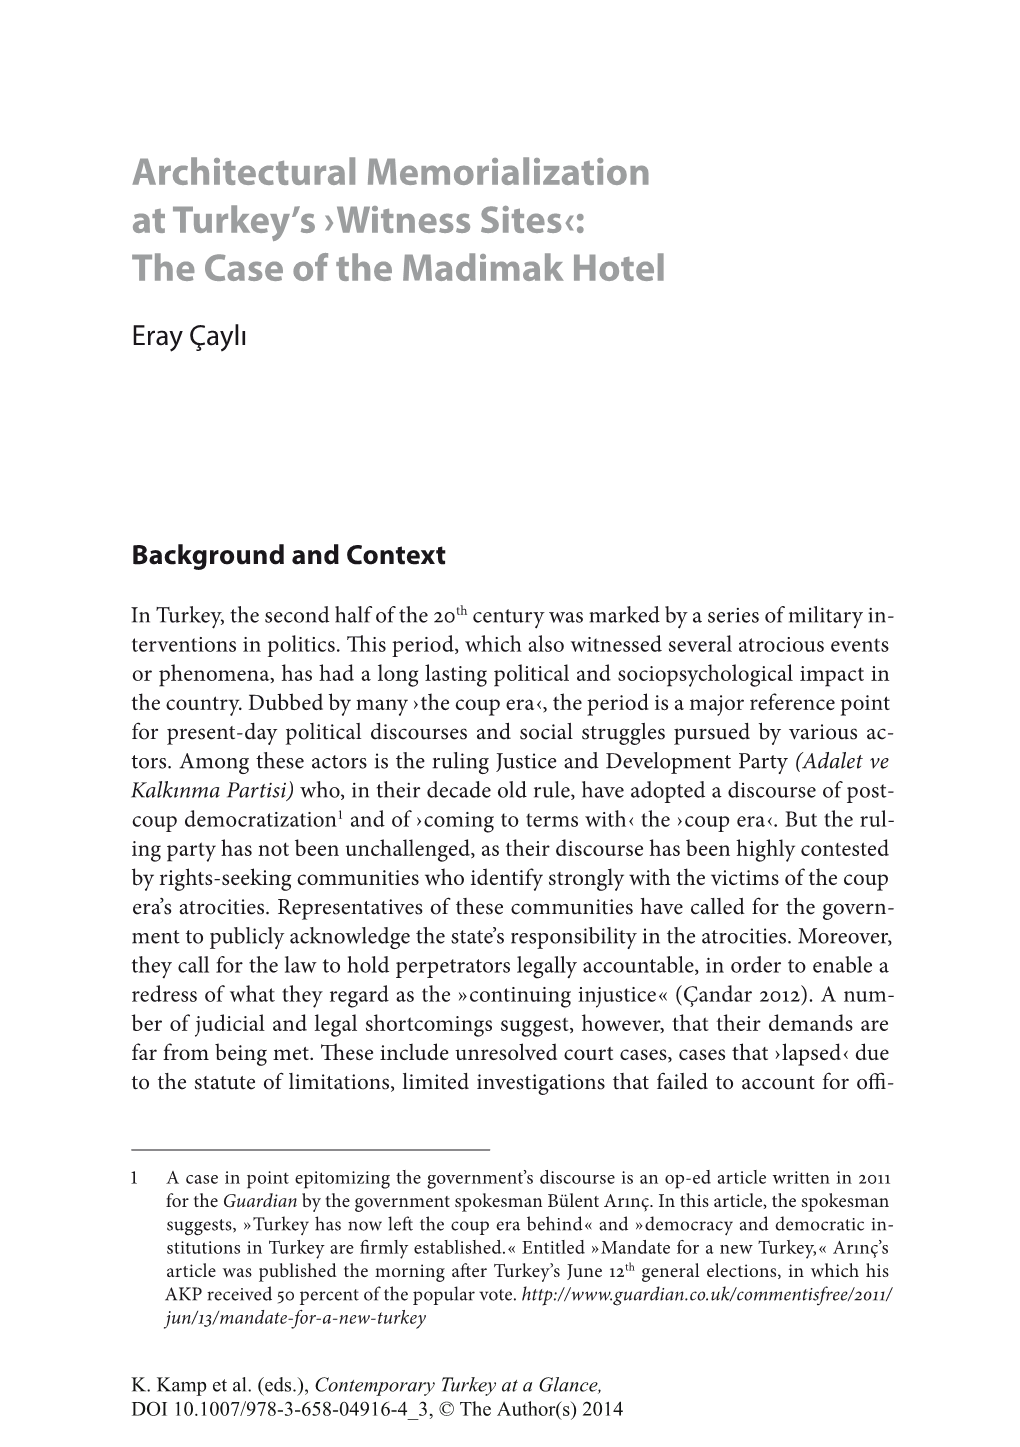 The Case of the Madimak Hotel